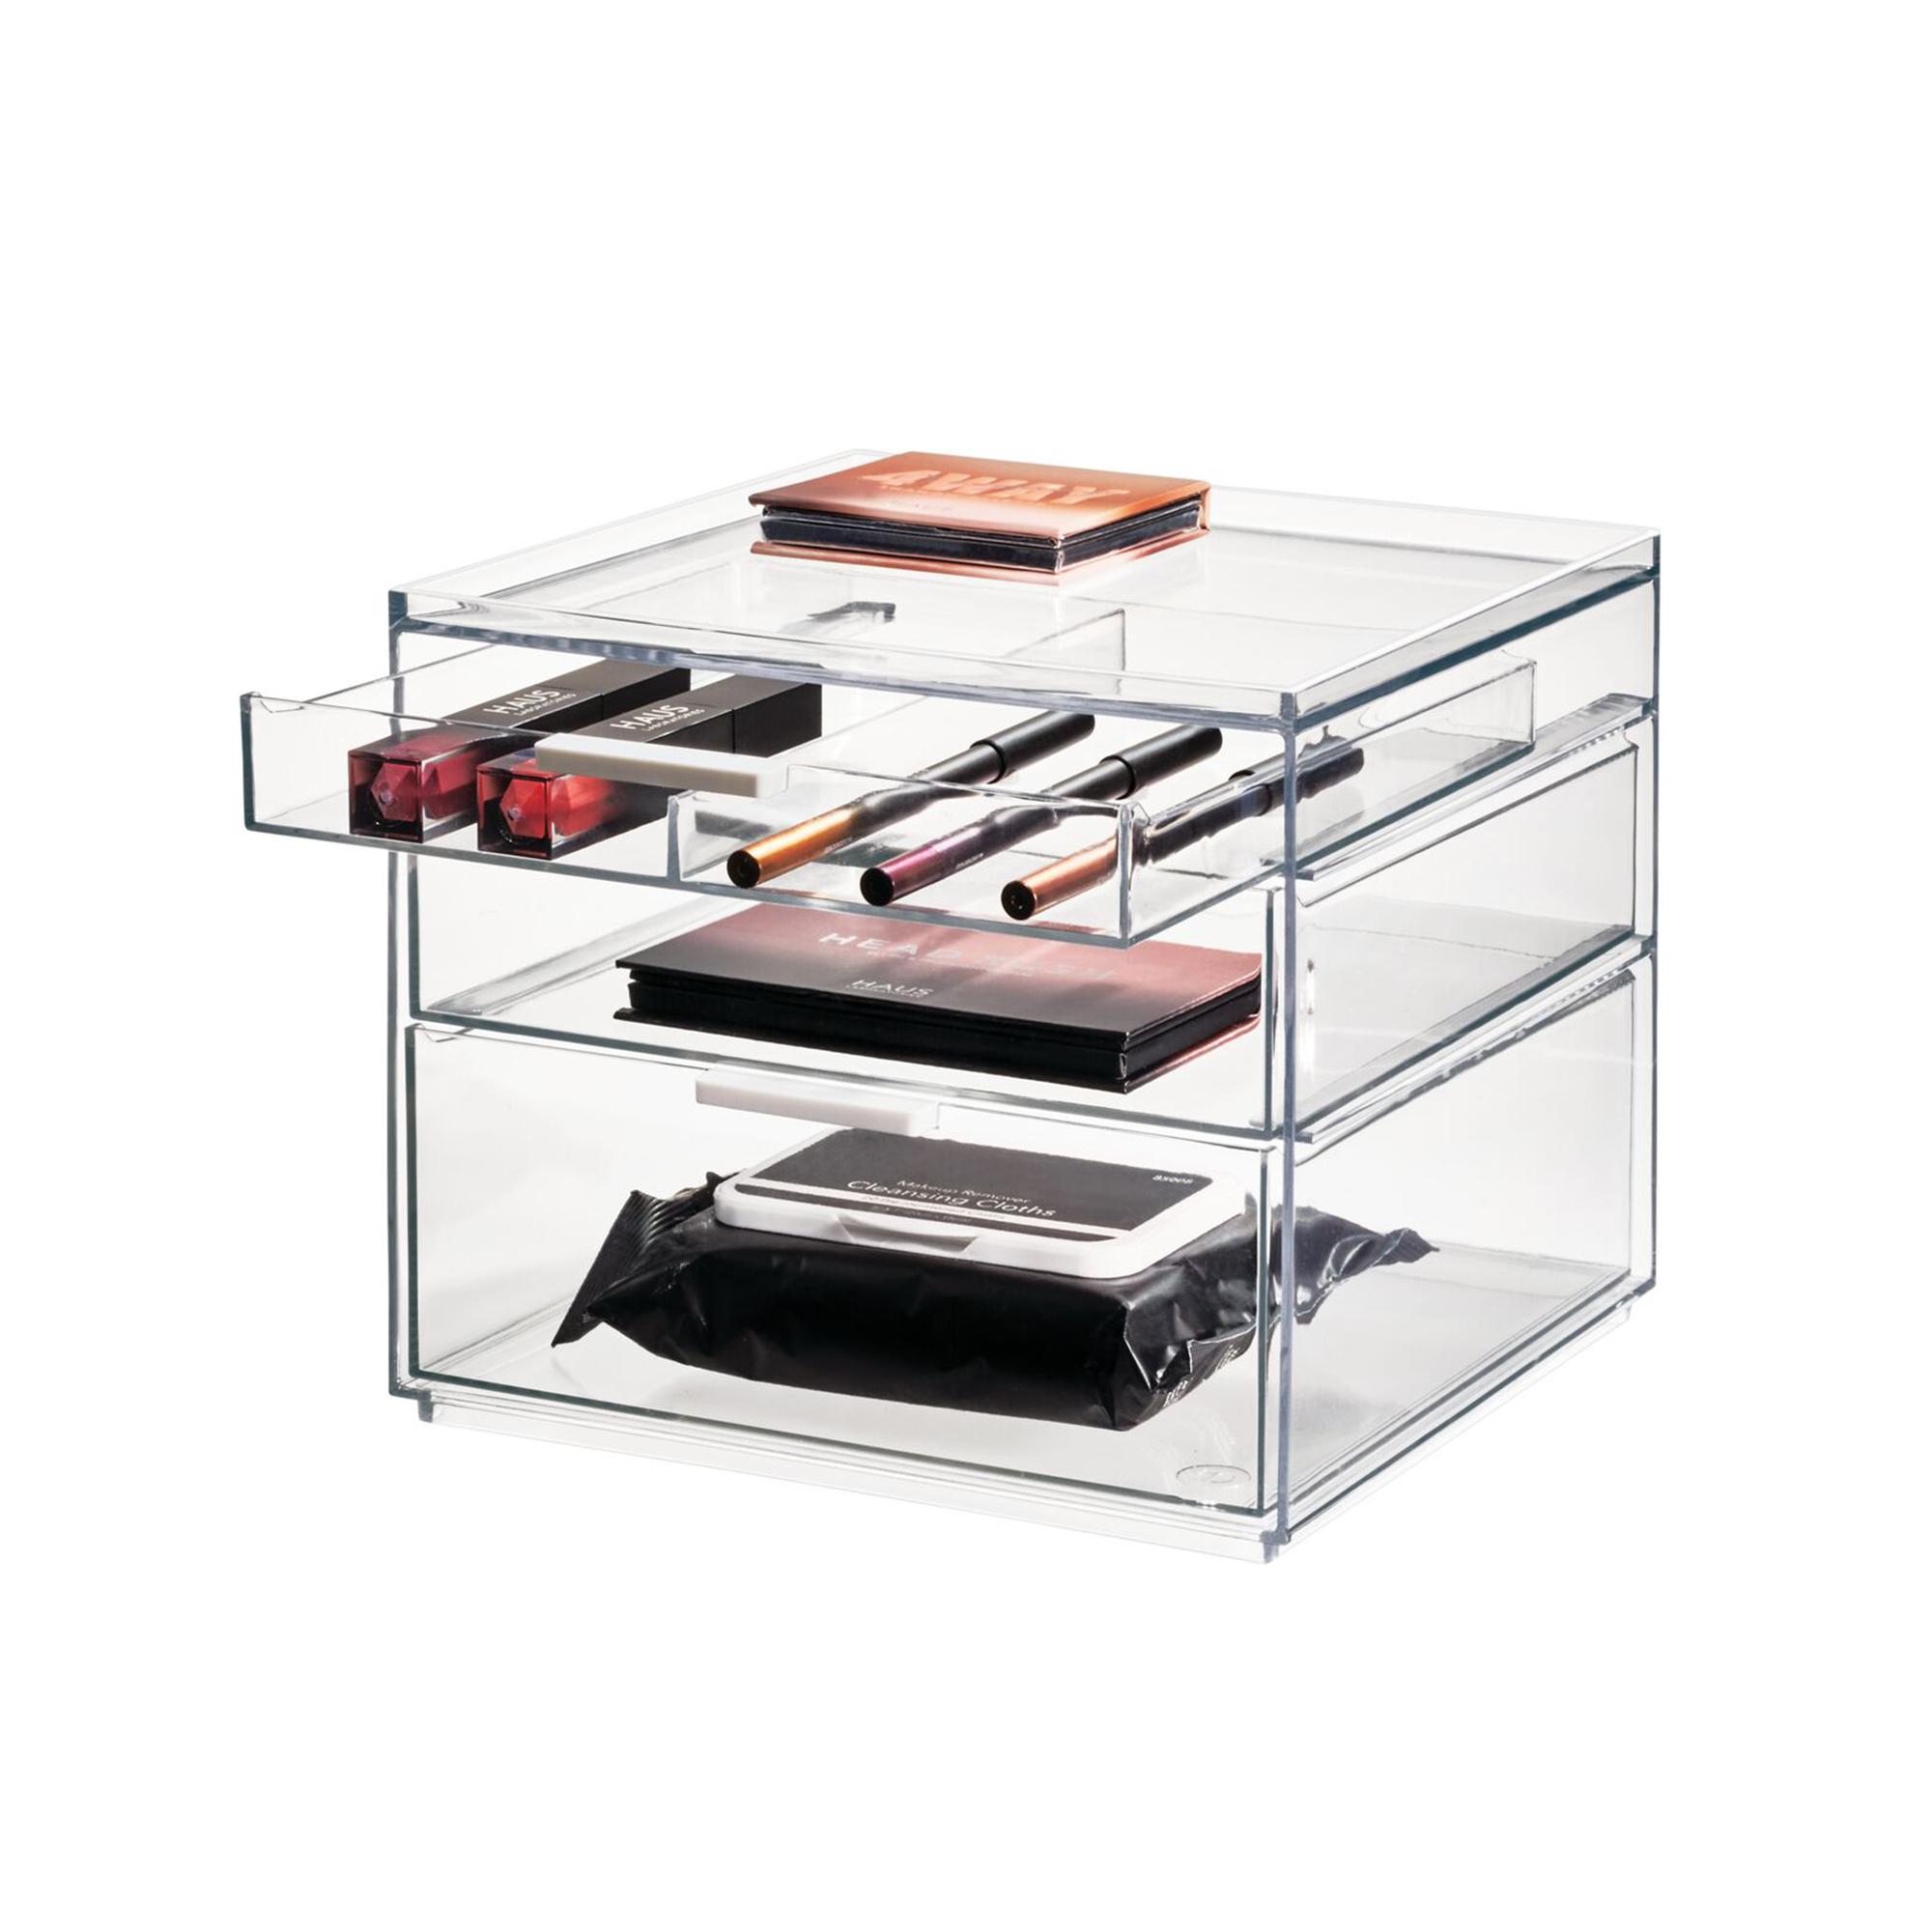 Sarah Tanno by iDesign 3 Drawer Cosmetic Organiser Clear Image 4